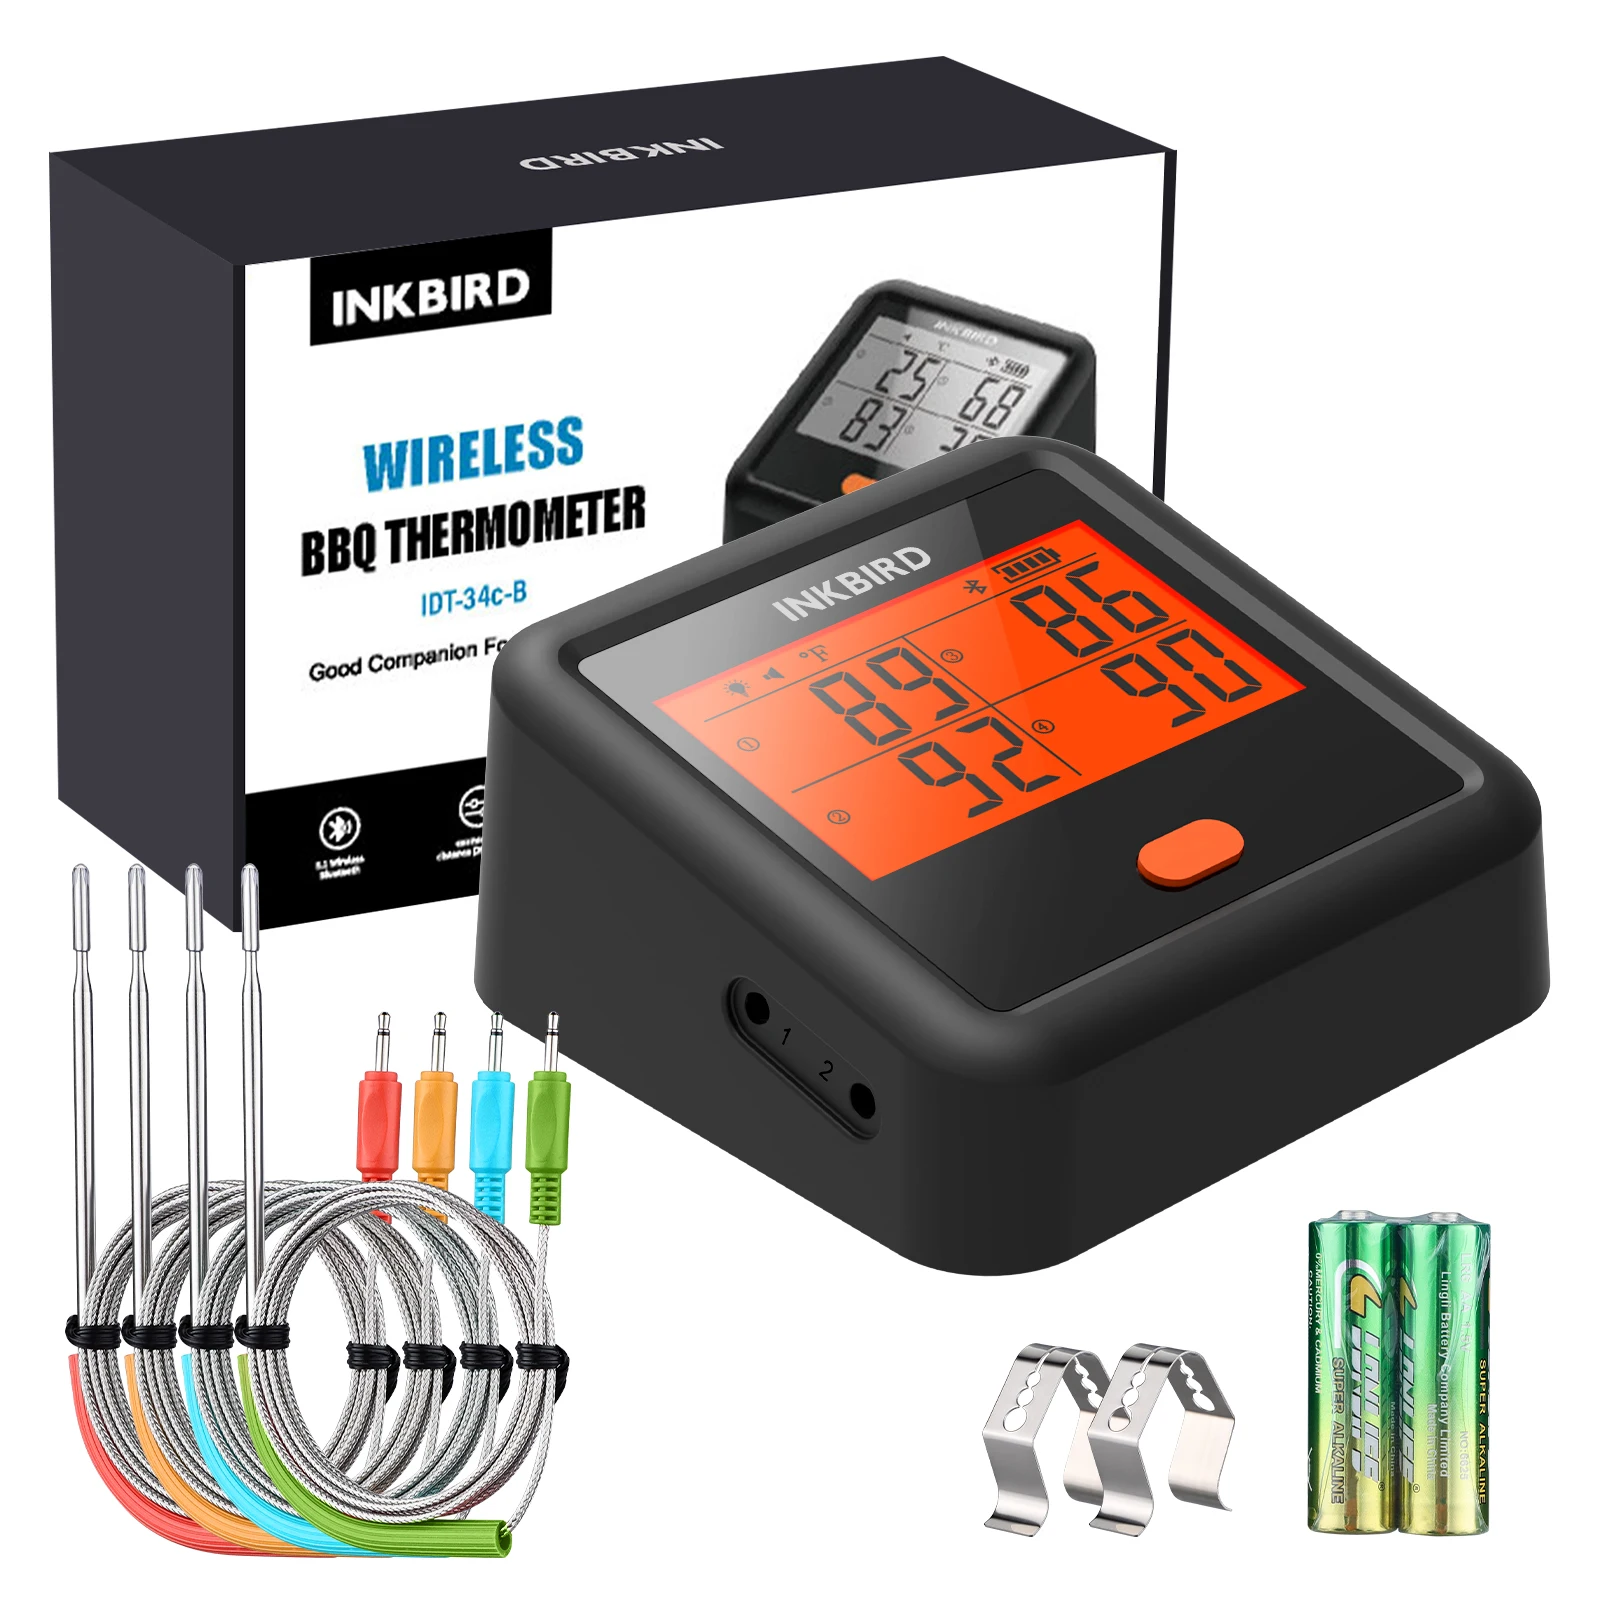 inkbird idt-34c-b meat thermometer for grilling